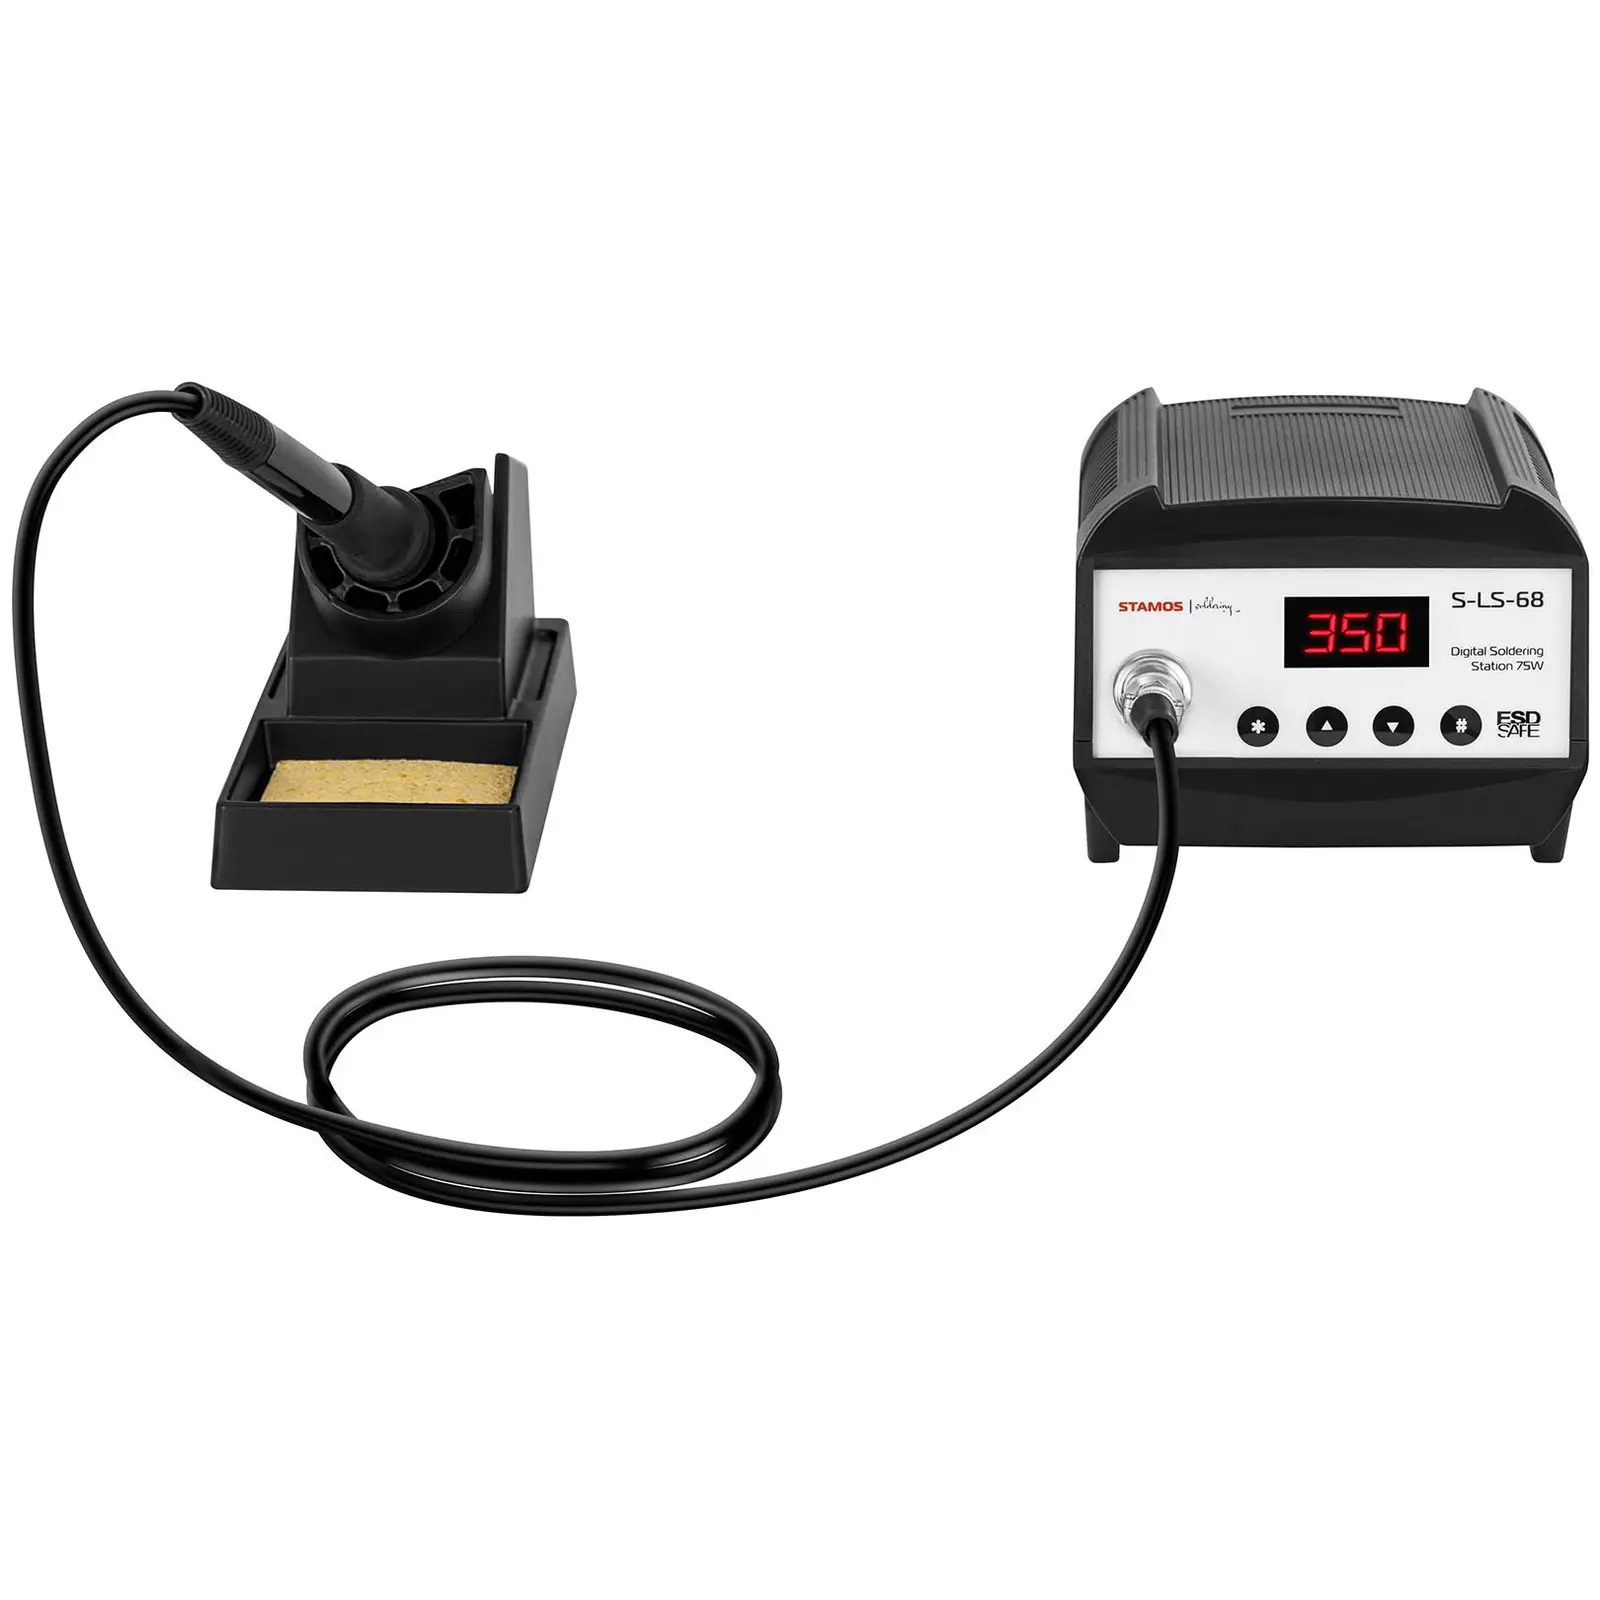 Soldering Station - digital - with soldering iron and holder - 75 W - LED